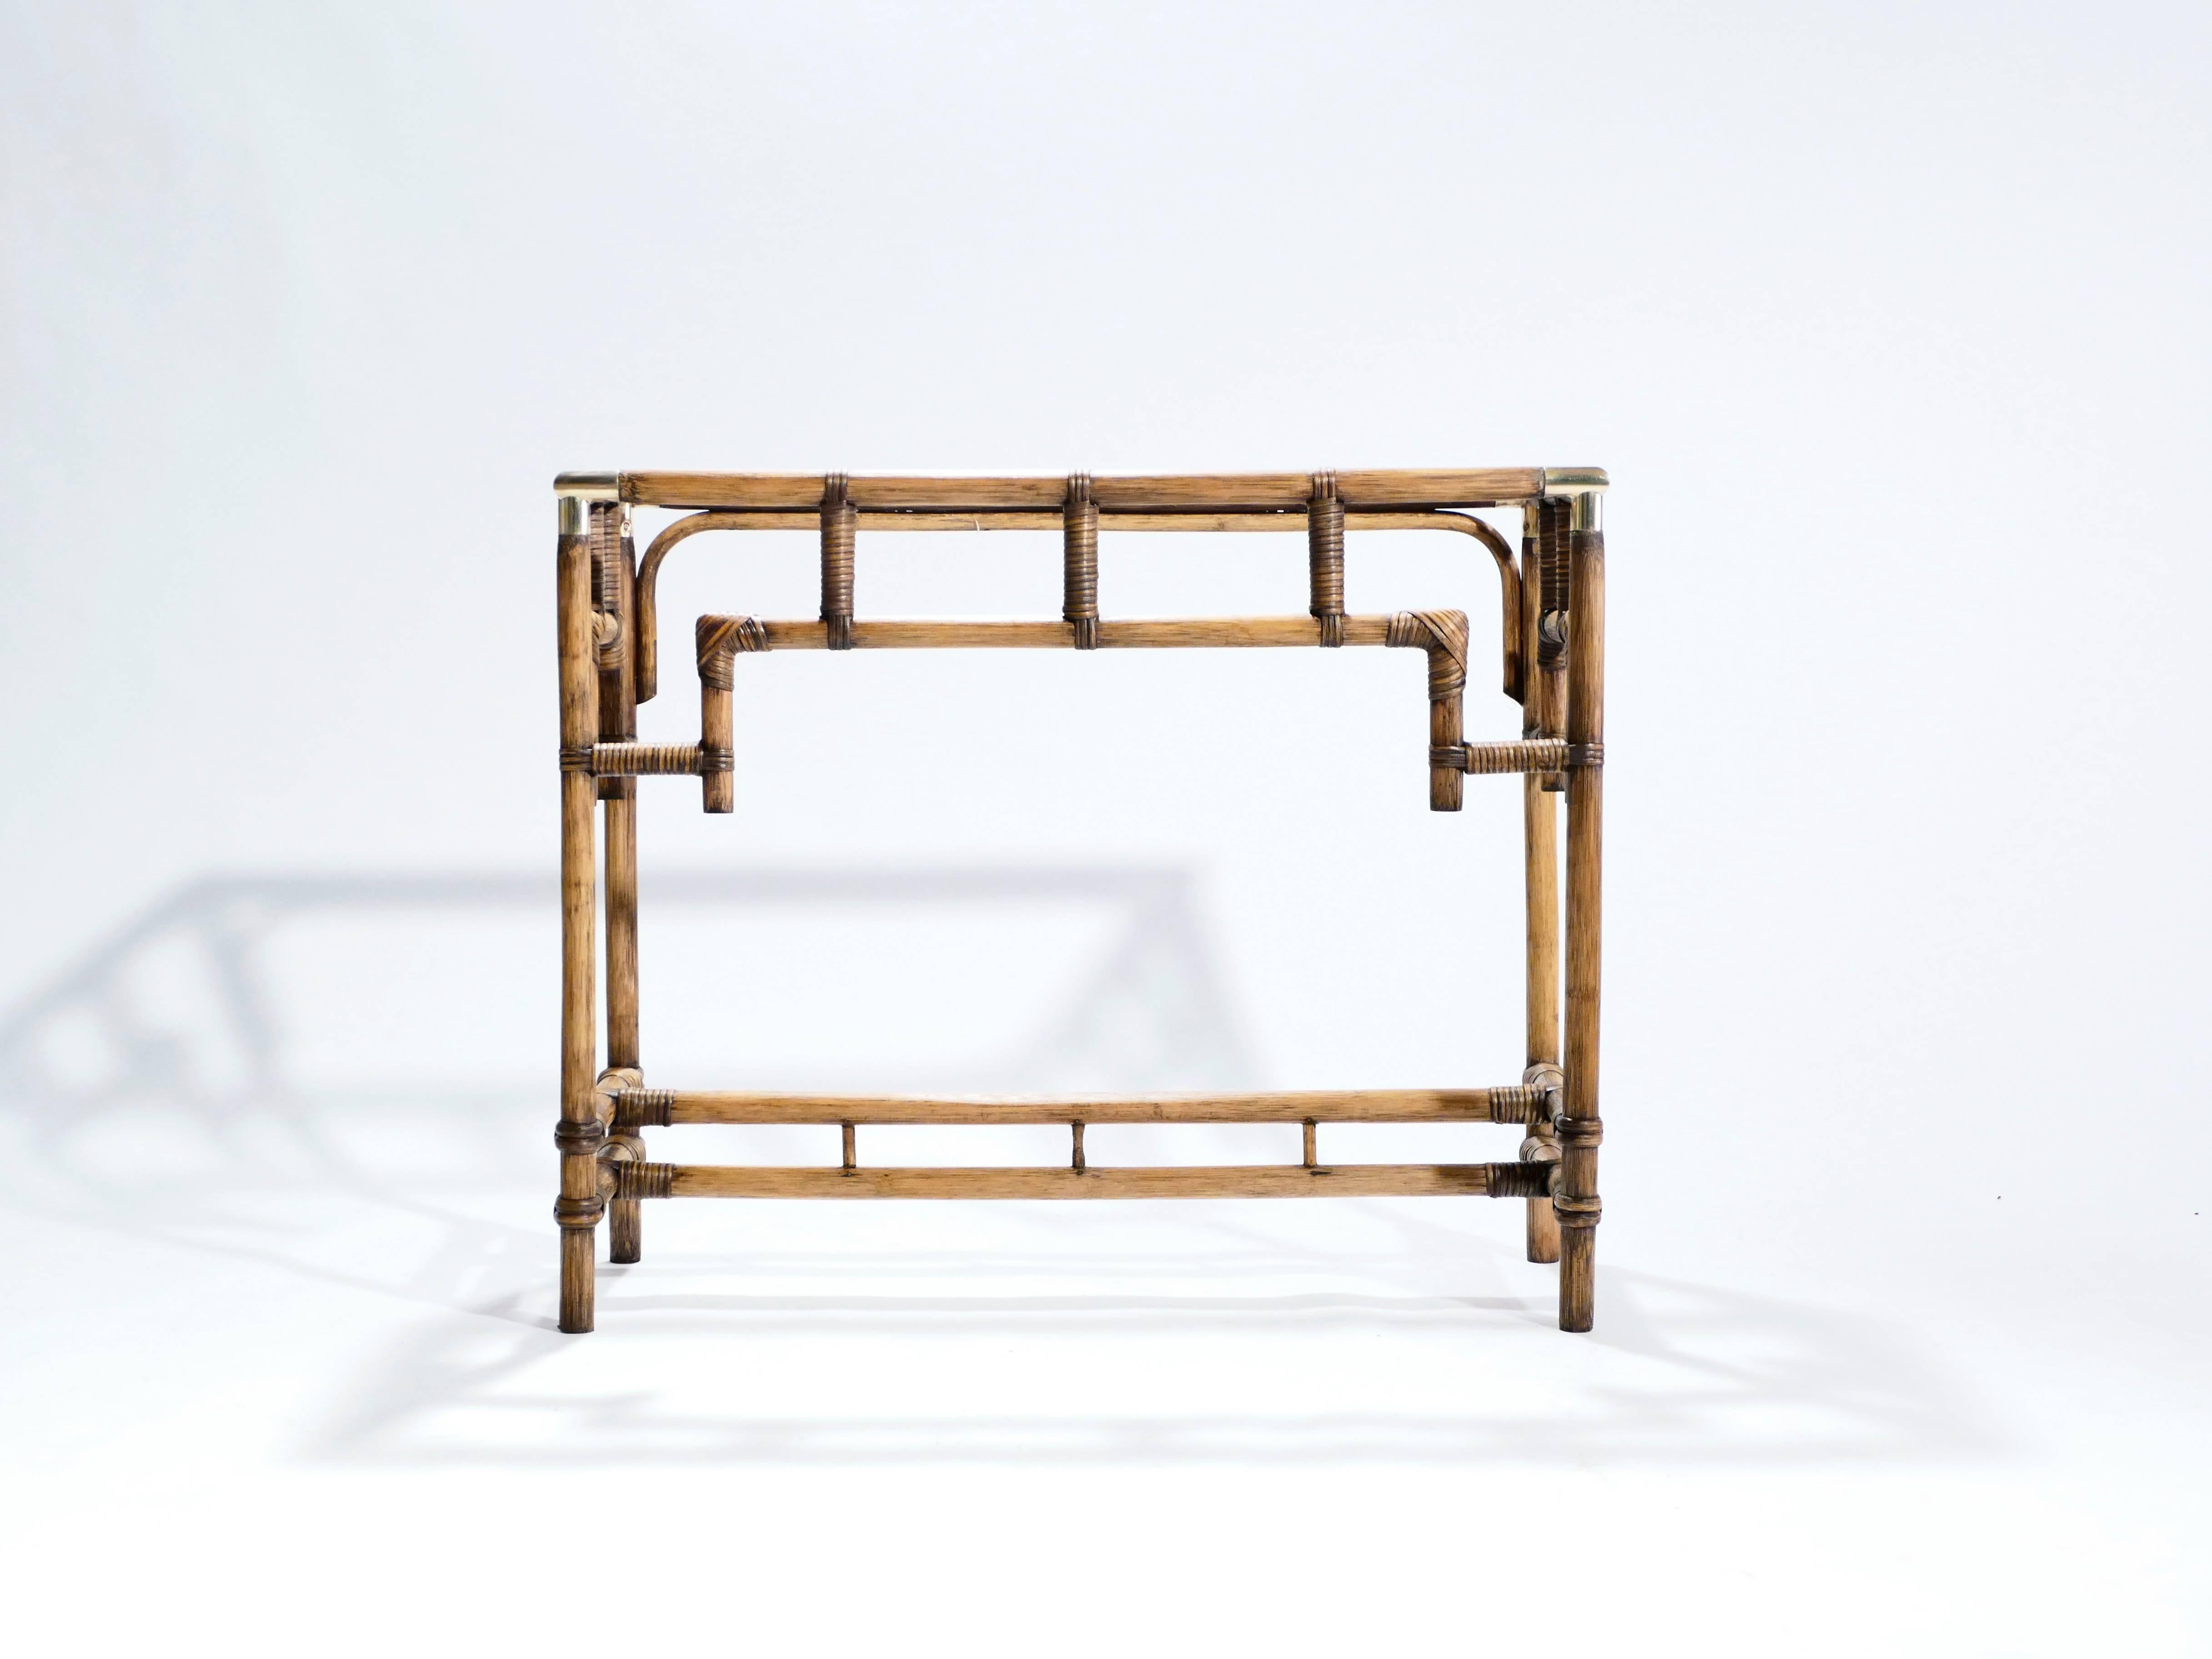 For a decorative entranceway piece, this console table is made largely from beautiful natural bamboo, with luxe displays of brass on the joints. Its surface is transparent glass. The piece was designed in the opulent Hollywood Regency style, most